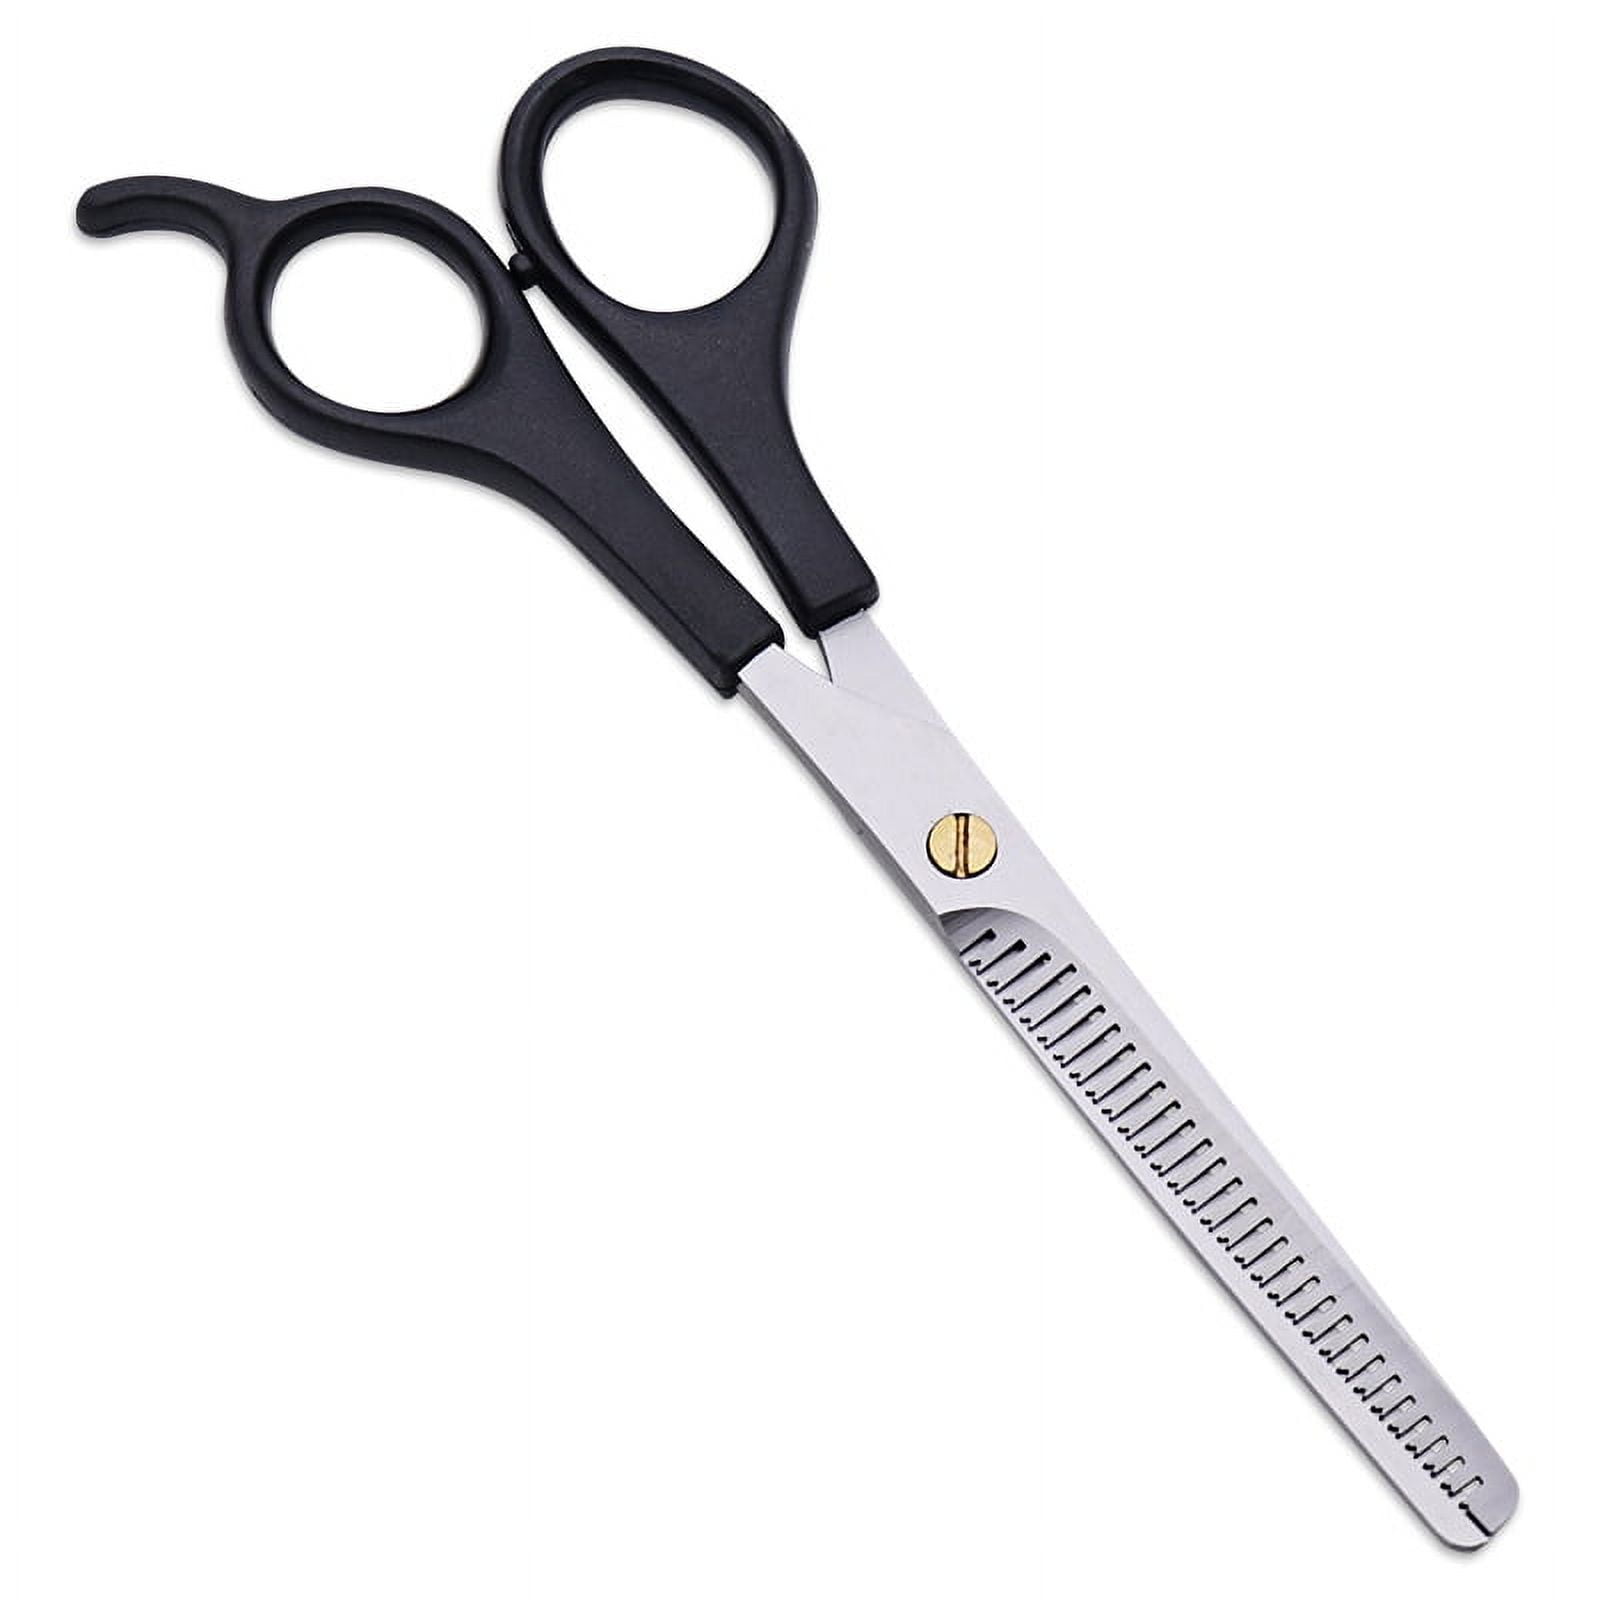 Stainless Steel Professional Hair Thinning Scissors 14 cm/5.5 inch with PVC  Case - Tenartis Made in Italy